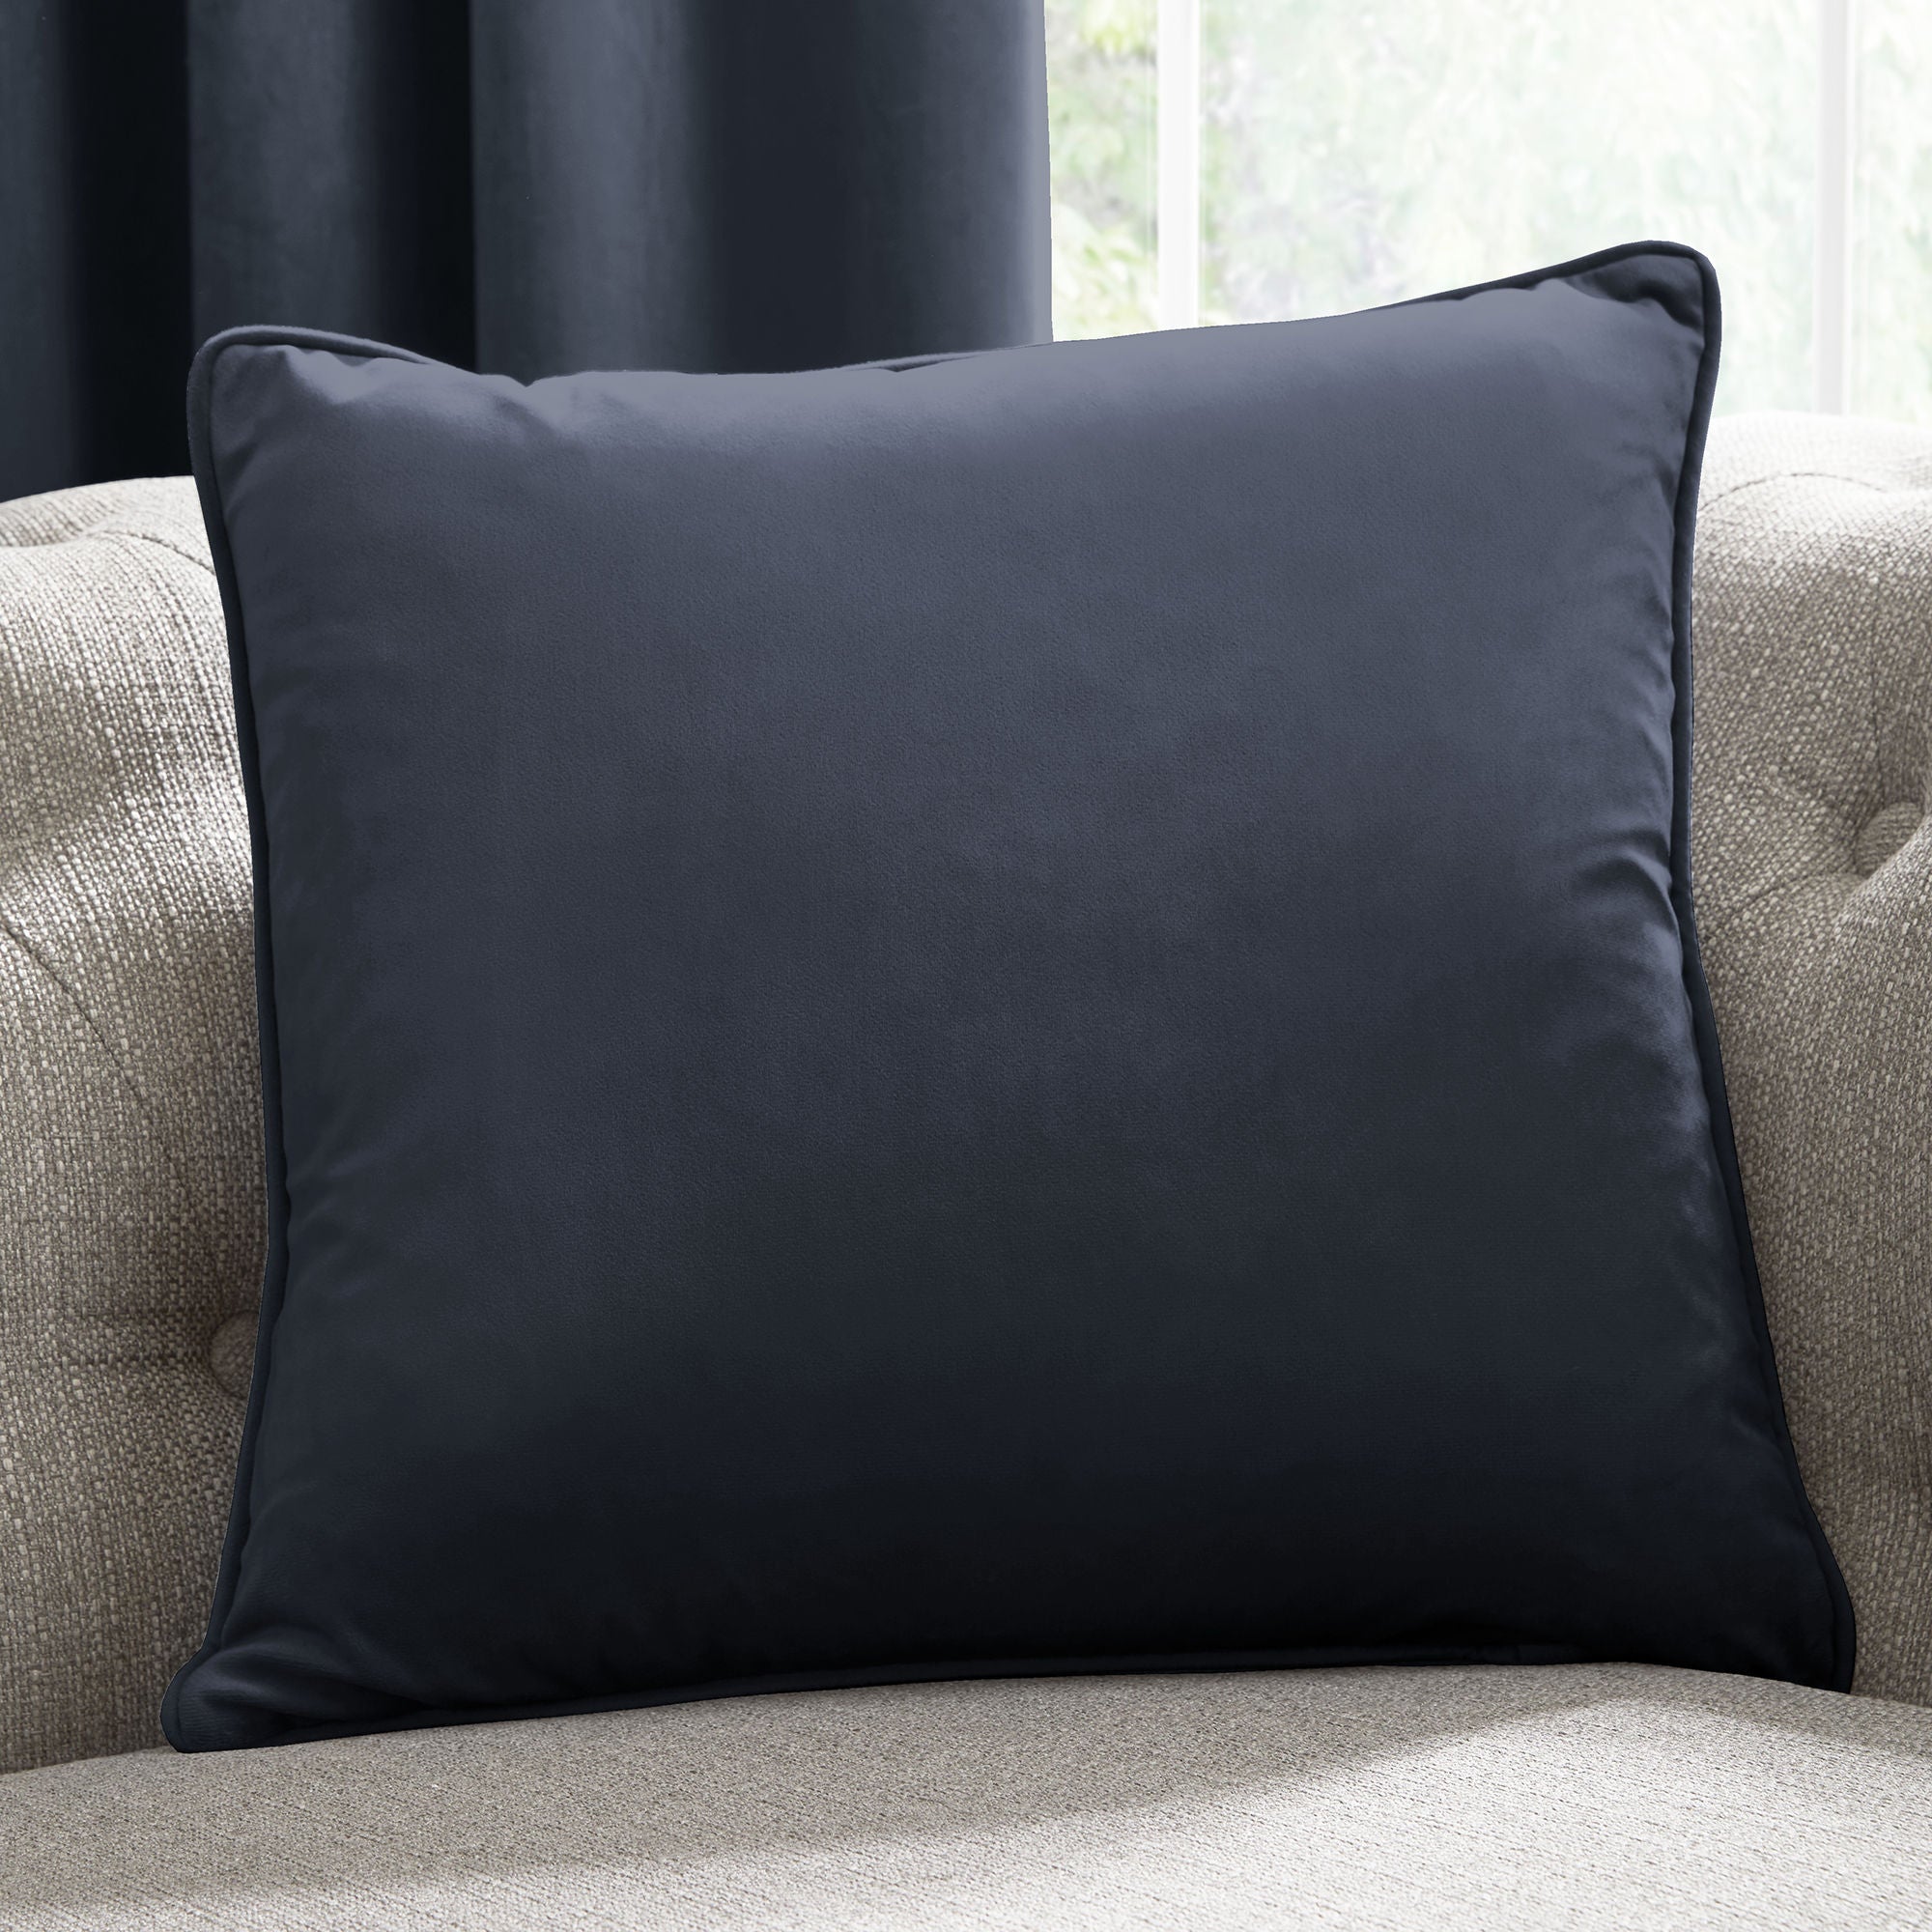 Montrose Cushion by Laurence Llewelyn-Bowen in Navy 43 x 43cm - Cushion - Laurence Llewelyn-Bowen